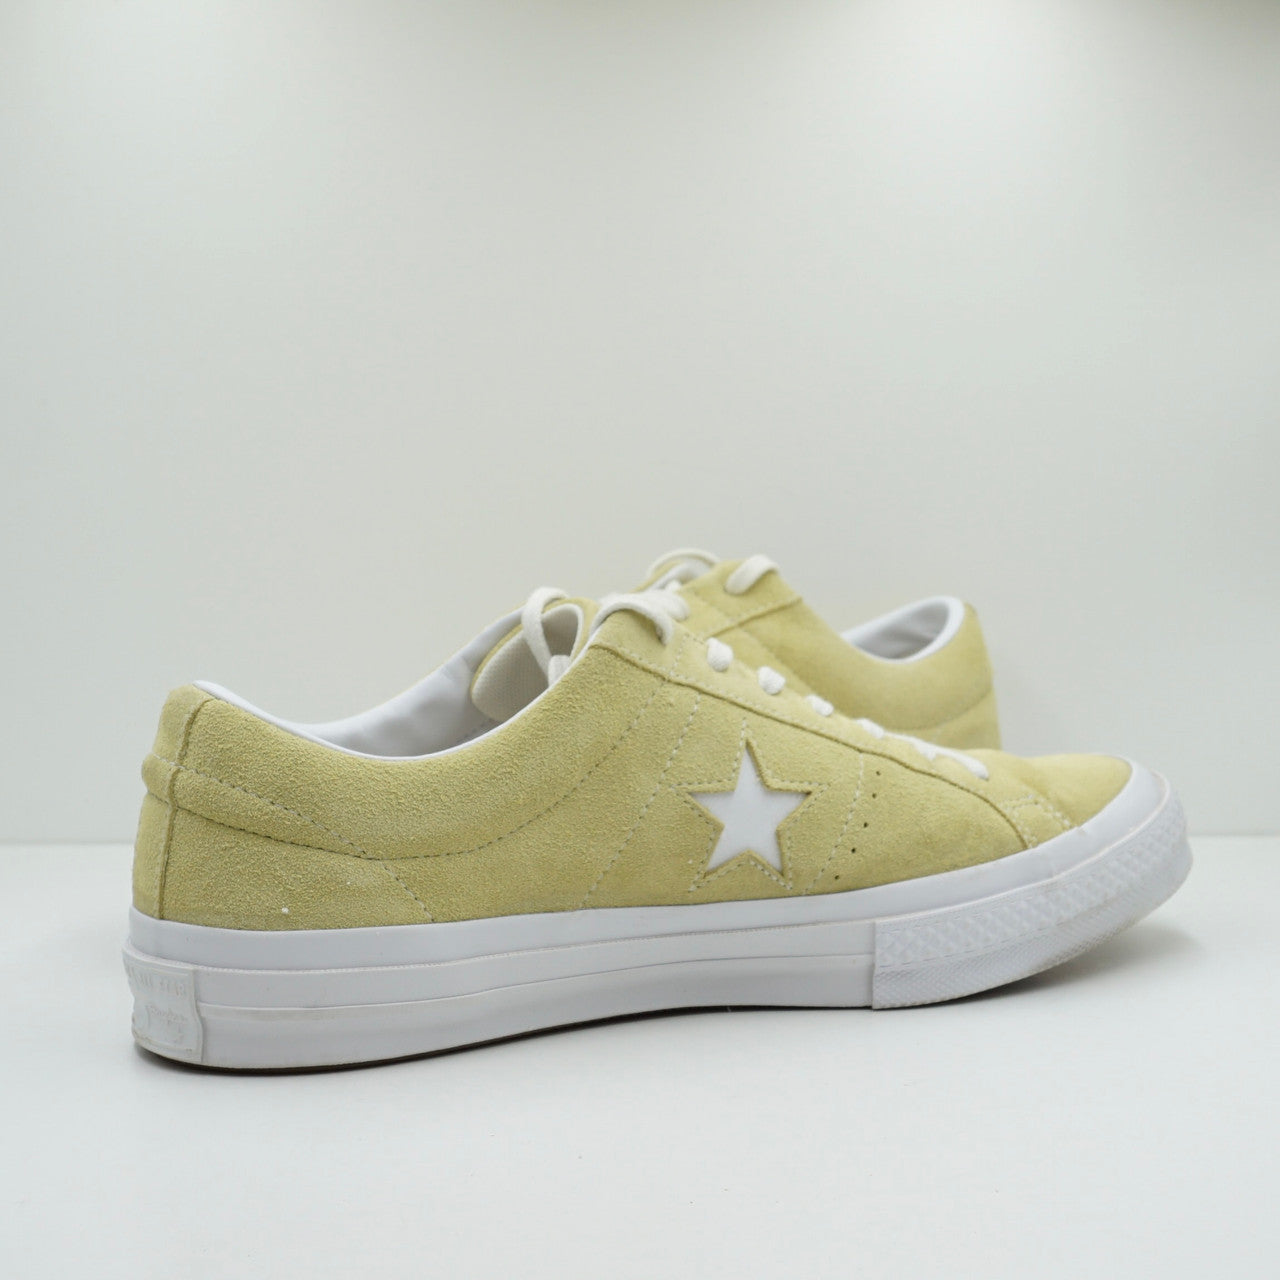 Converse One Star OX Yellow